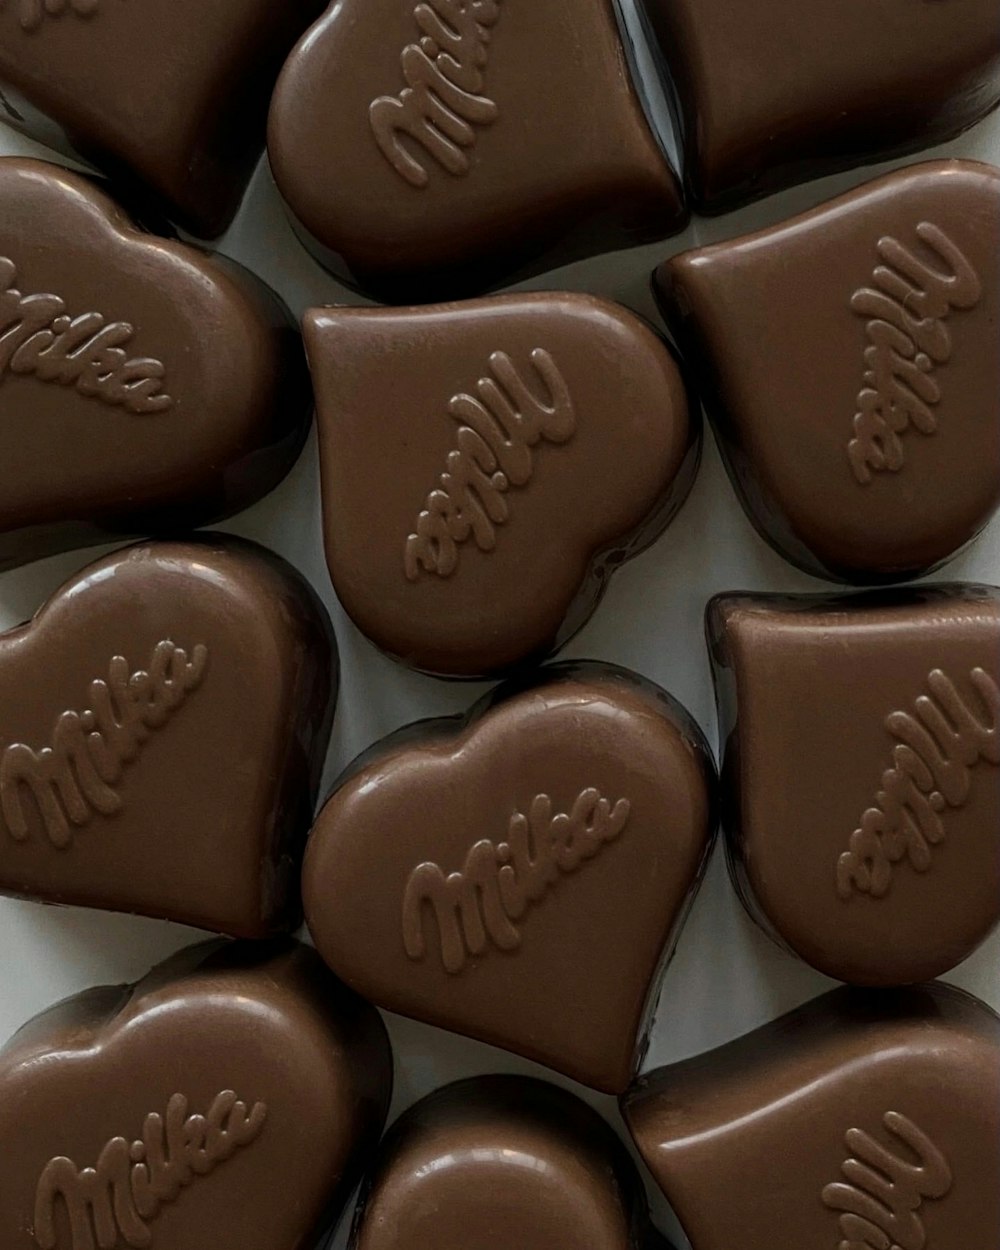 a box of chocolate hearts with names on them